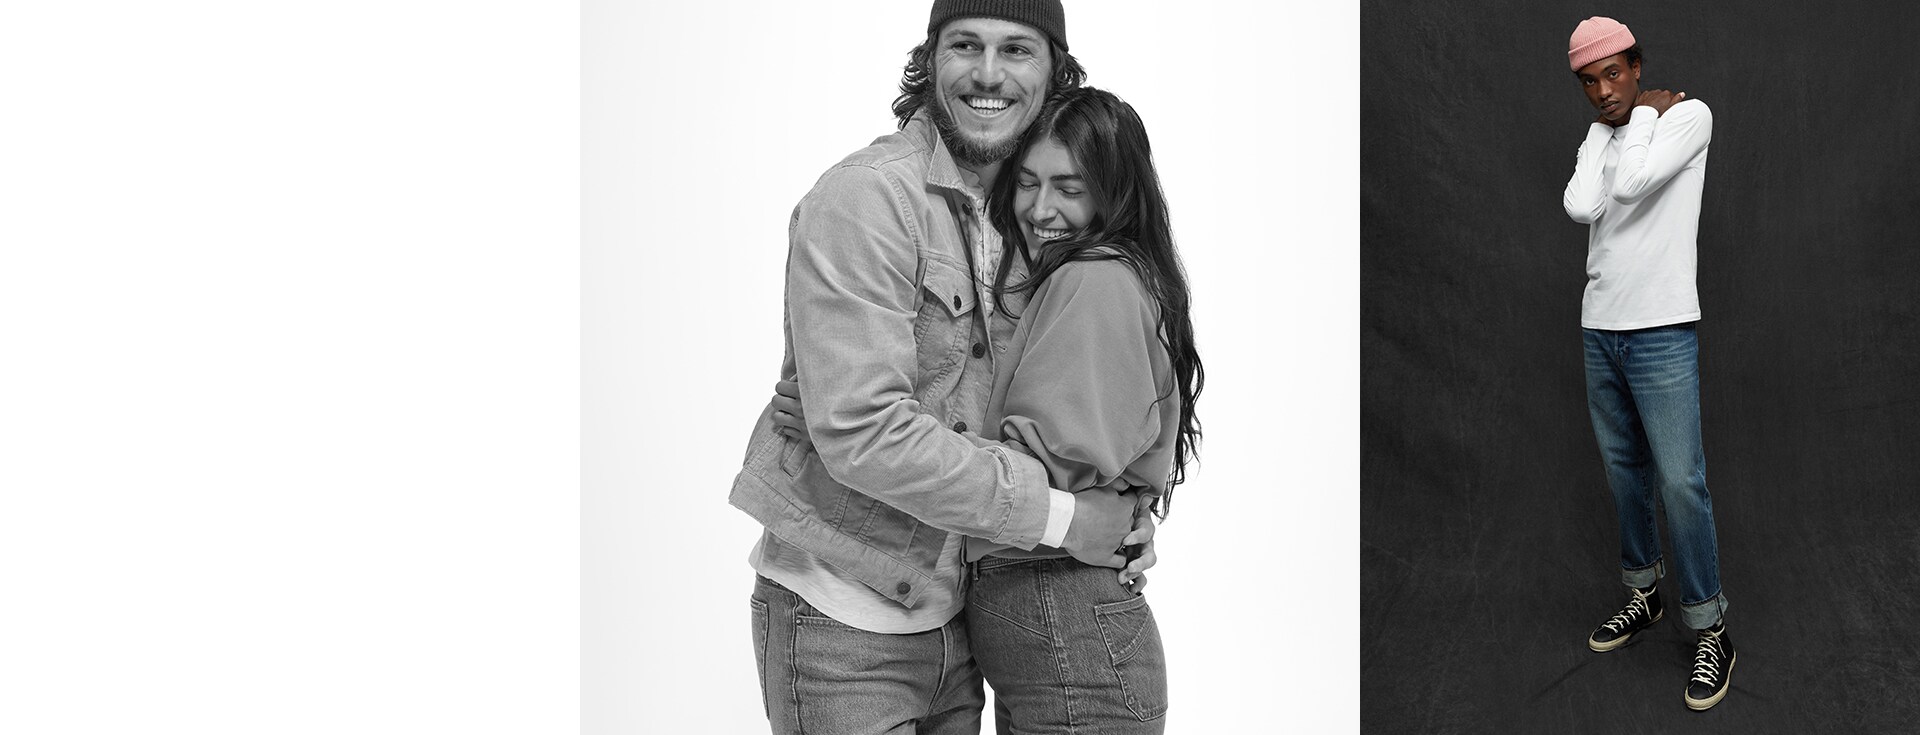 Black and white photo of a couple wearing denim jackets and jeans, and a color photo of a man wearing a knit hat, jeans, and a sweatshirt